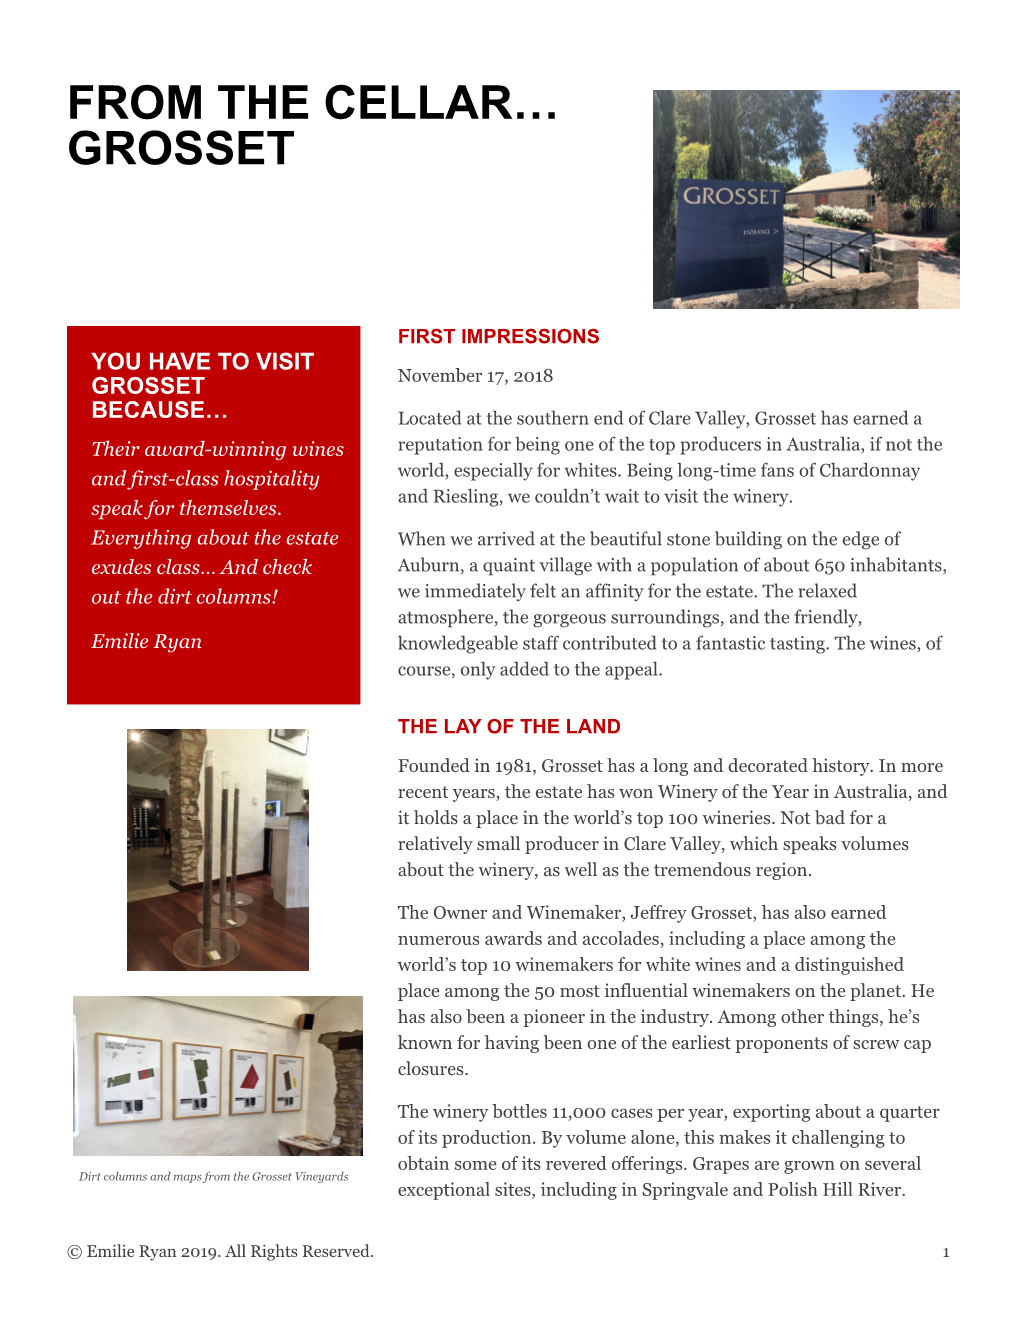 From the Cellar… Grosset